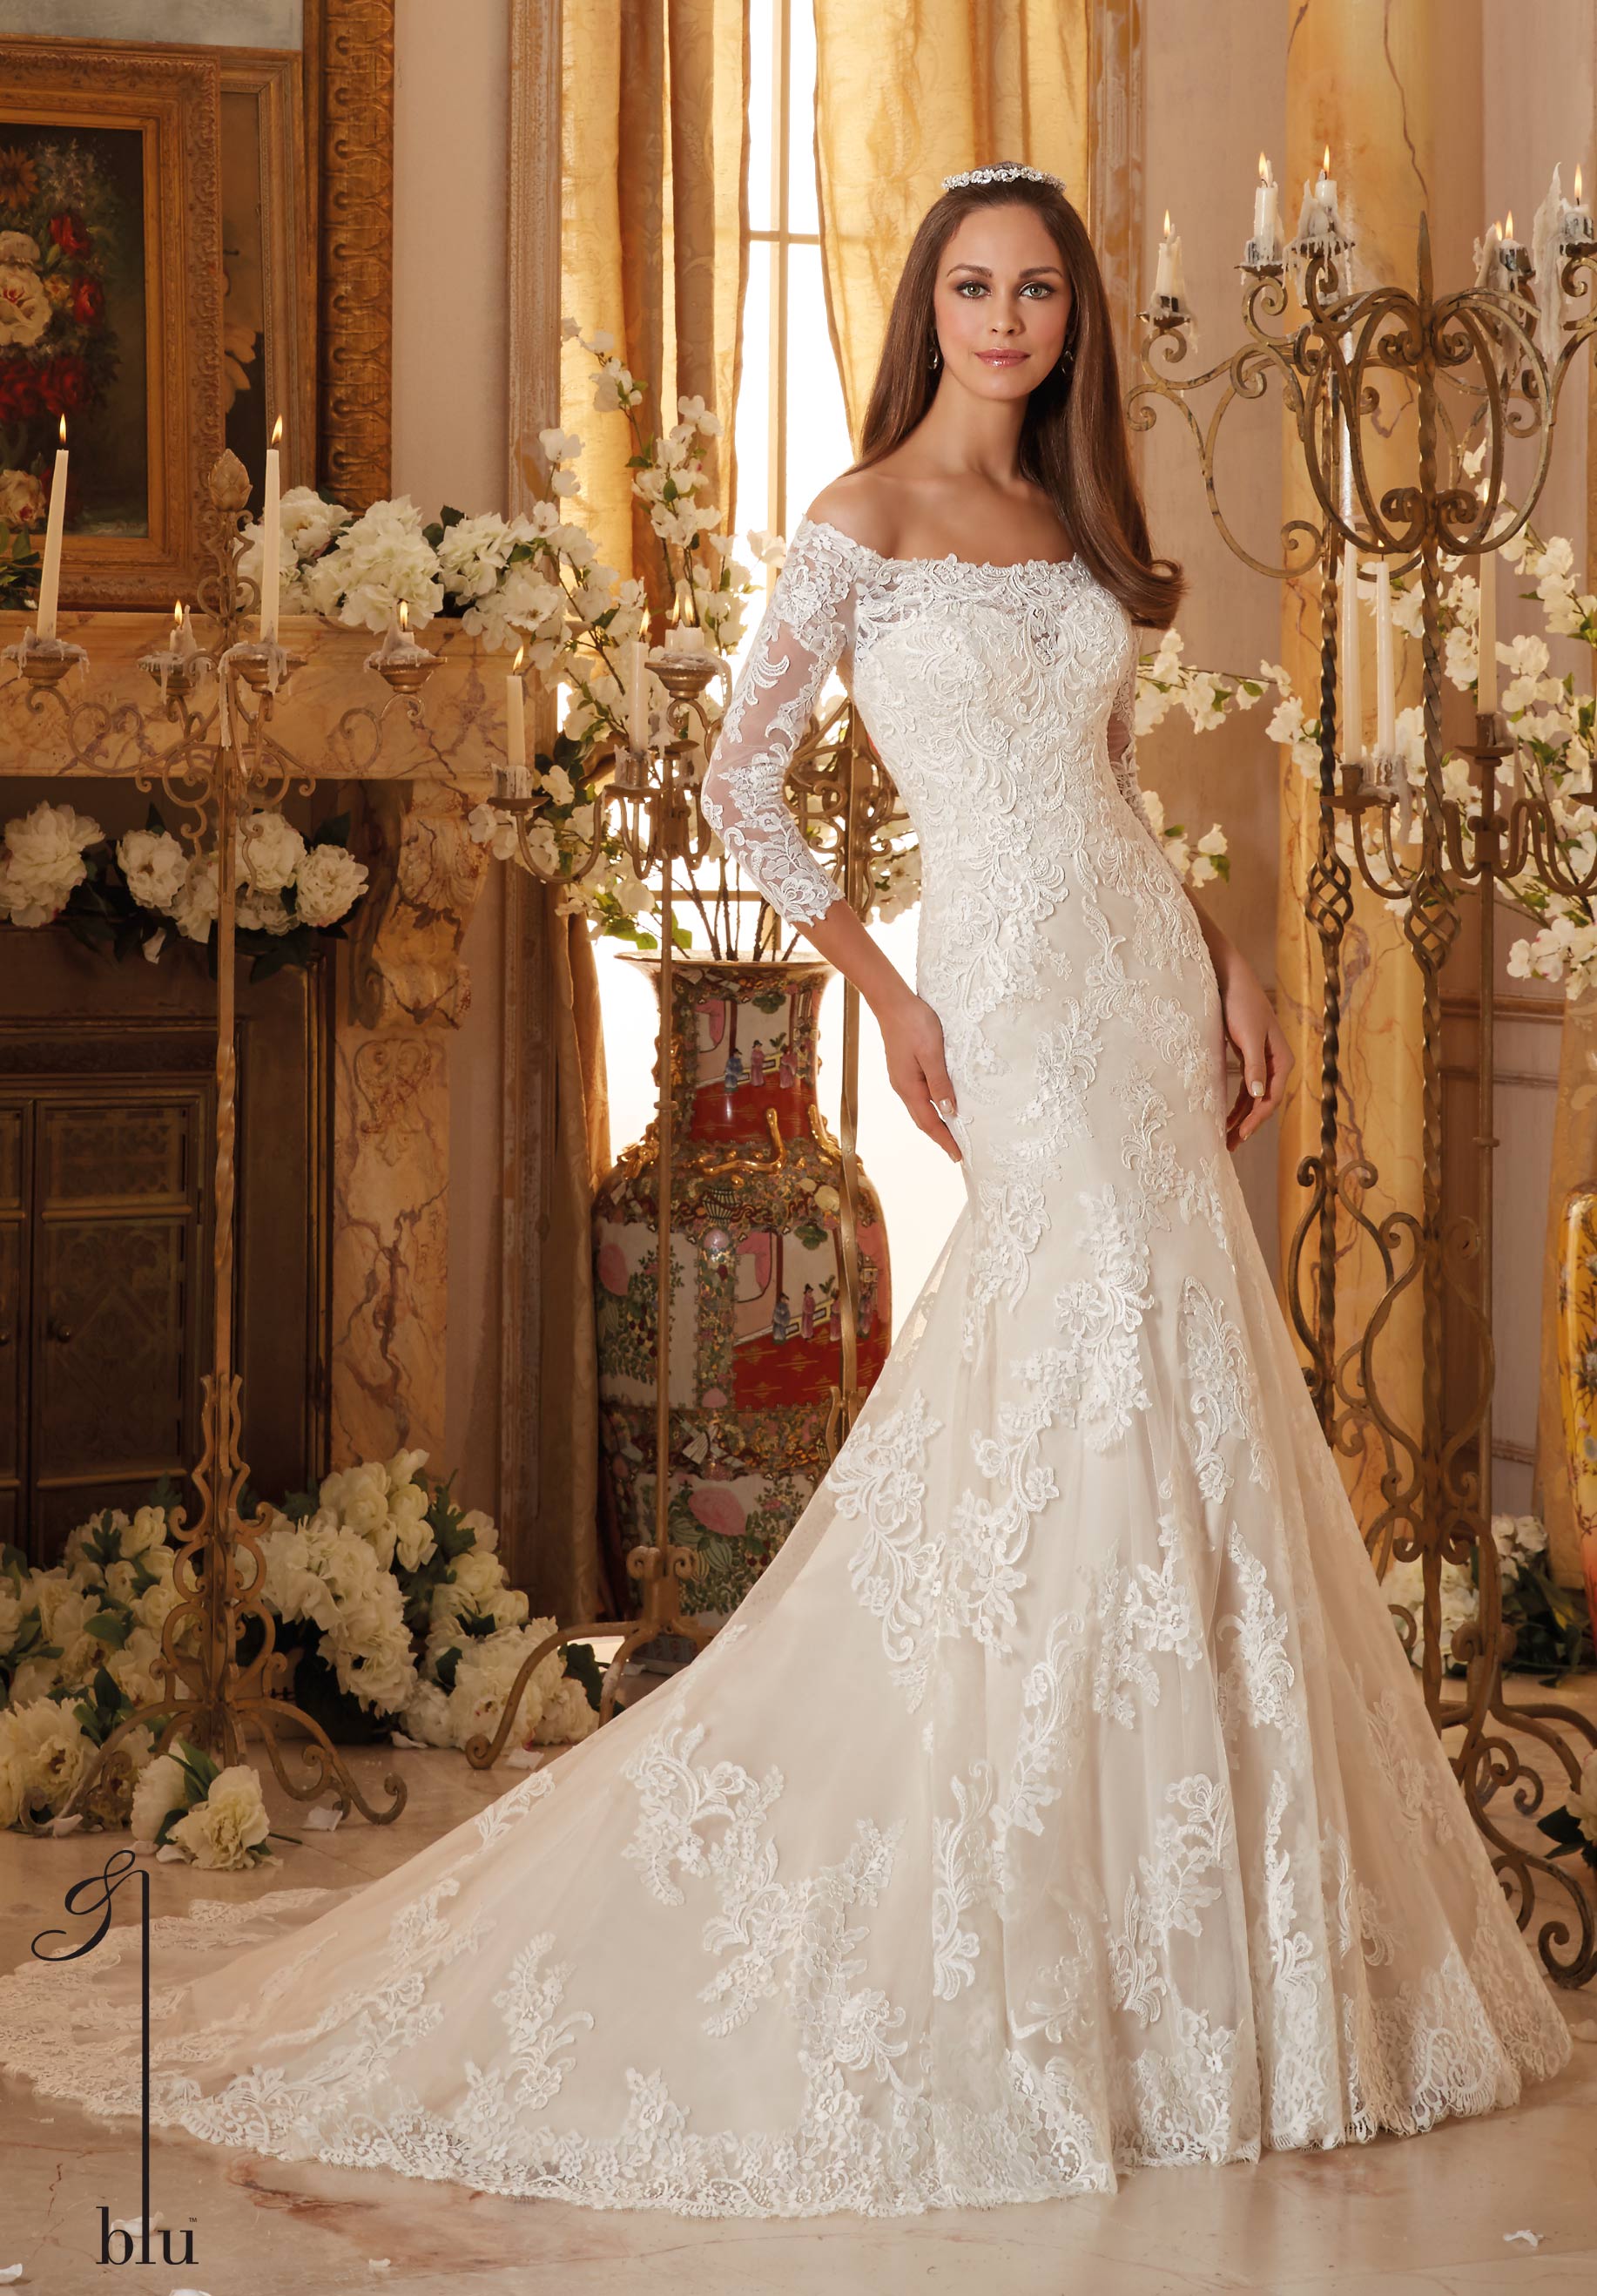 Best Wedding Dress Types of all time The ultimate guide | blackwedding3